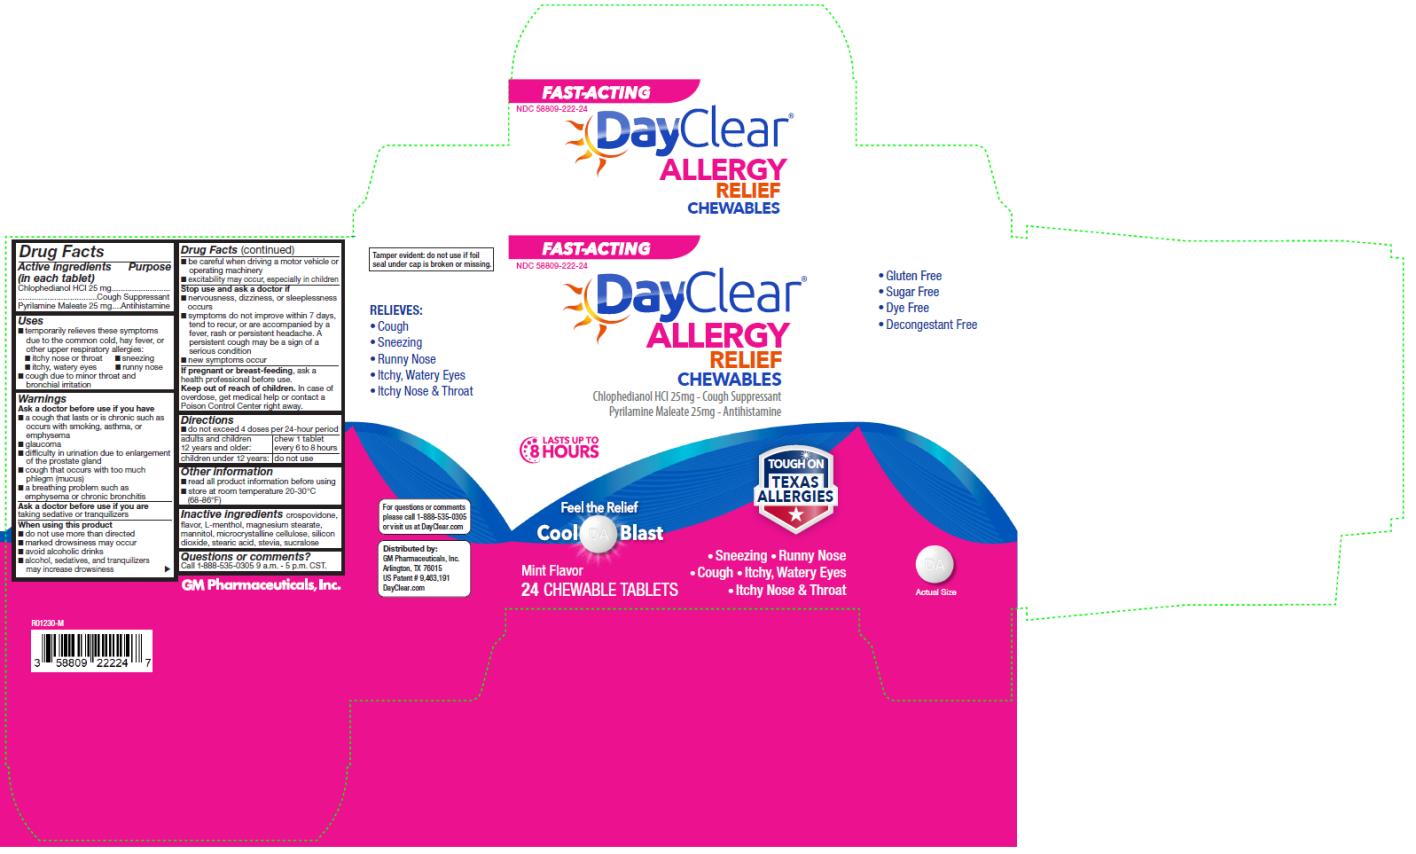 PRINCIPAL DISPLAY PANEL
NDC 58809-222-24
DayClear
Allergy
Relief
Chewables
24 Chewable Tablets 
